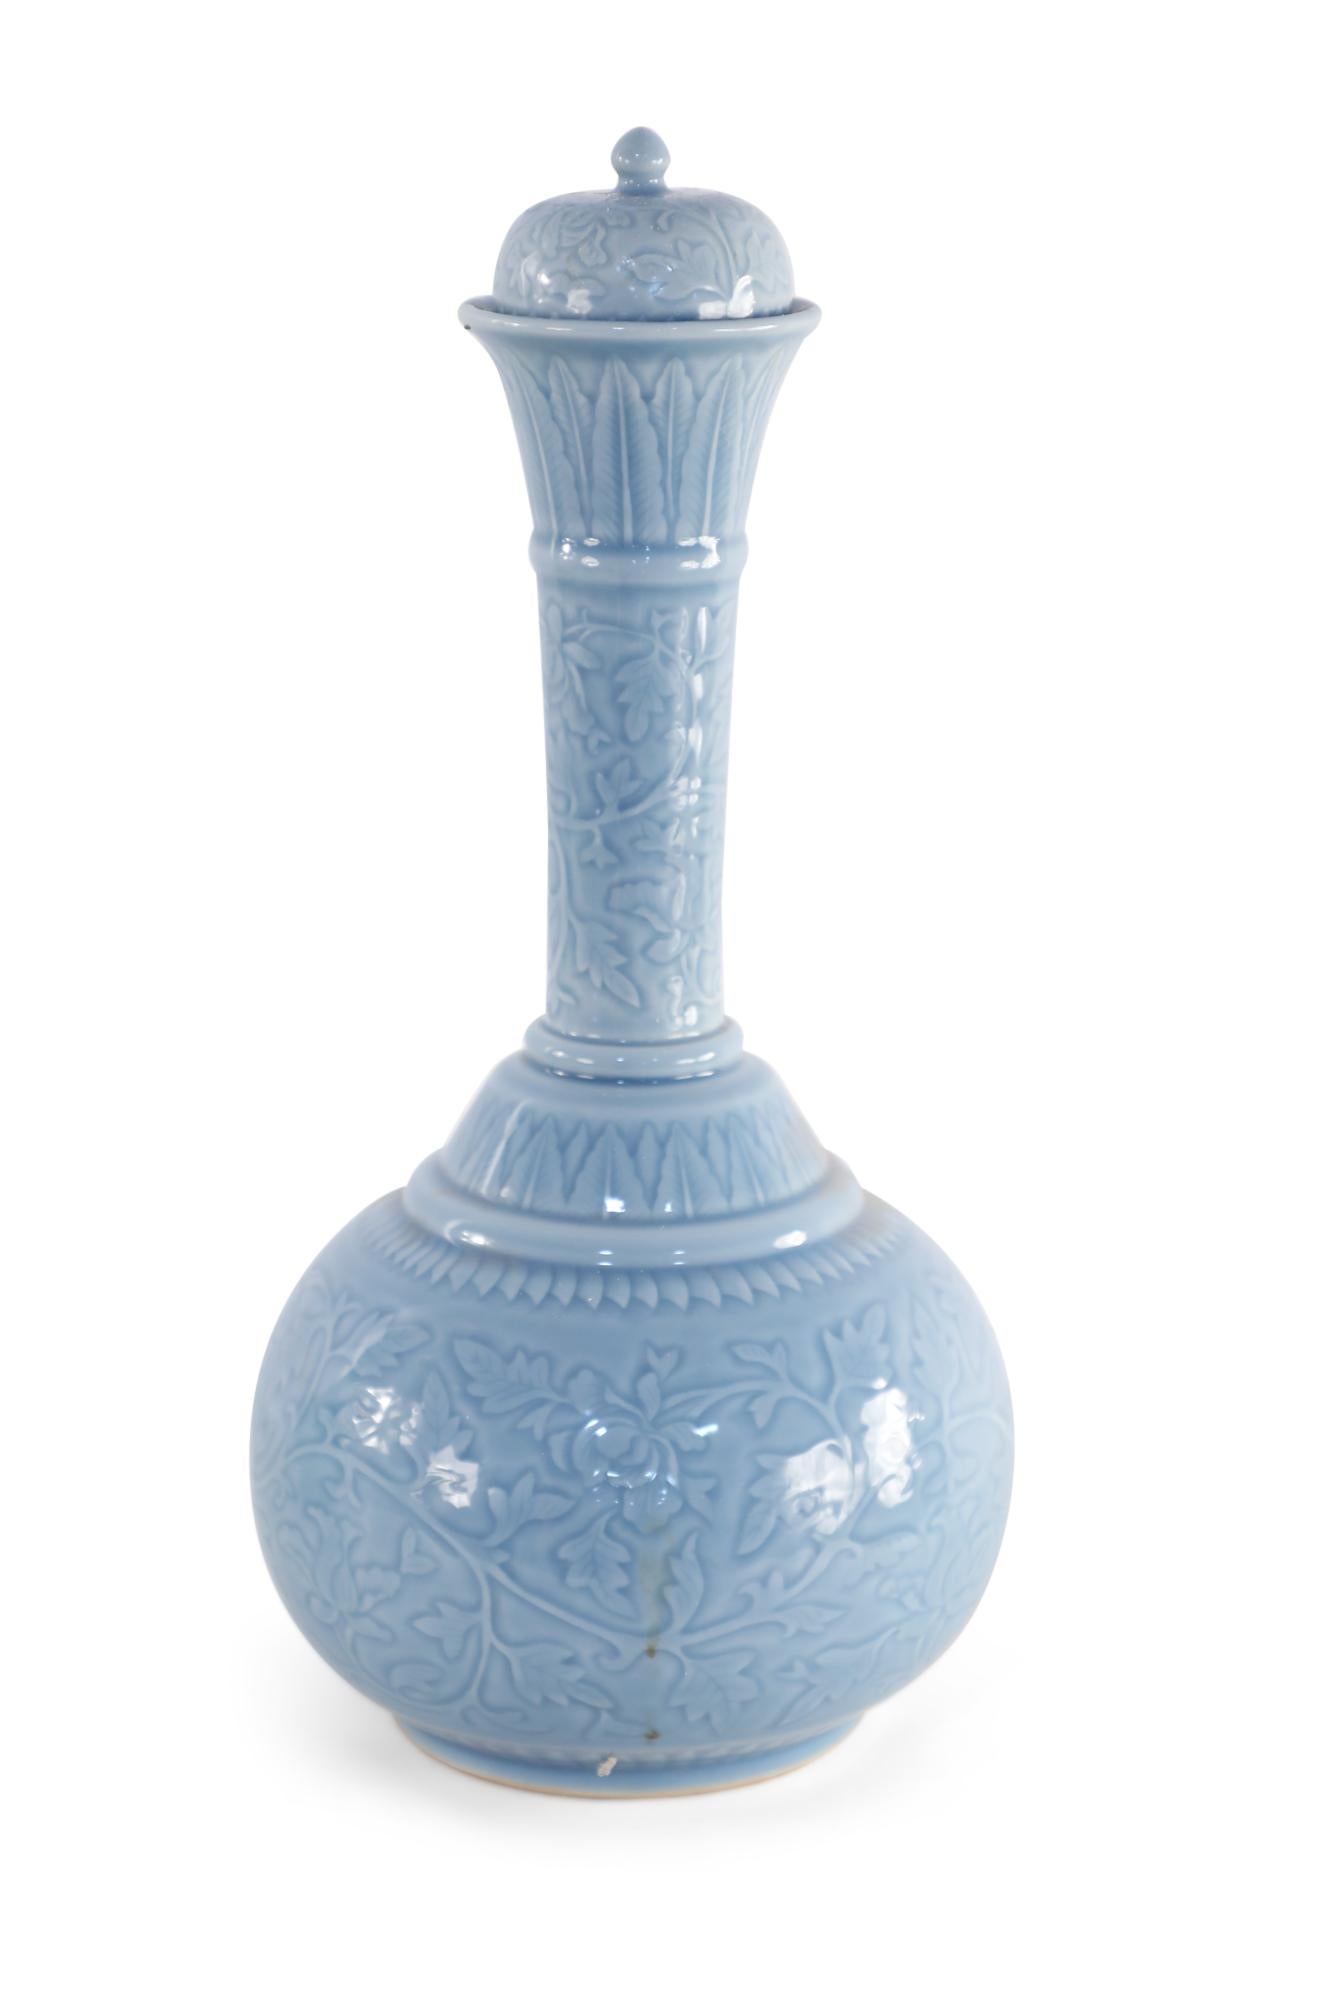 20th-Century Chinese cornflower blue porcelain vase with a gourd-shaped form wrapped in a tonal vine pattern and fitted with a ball finial-topped lid.